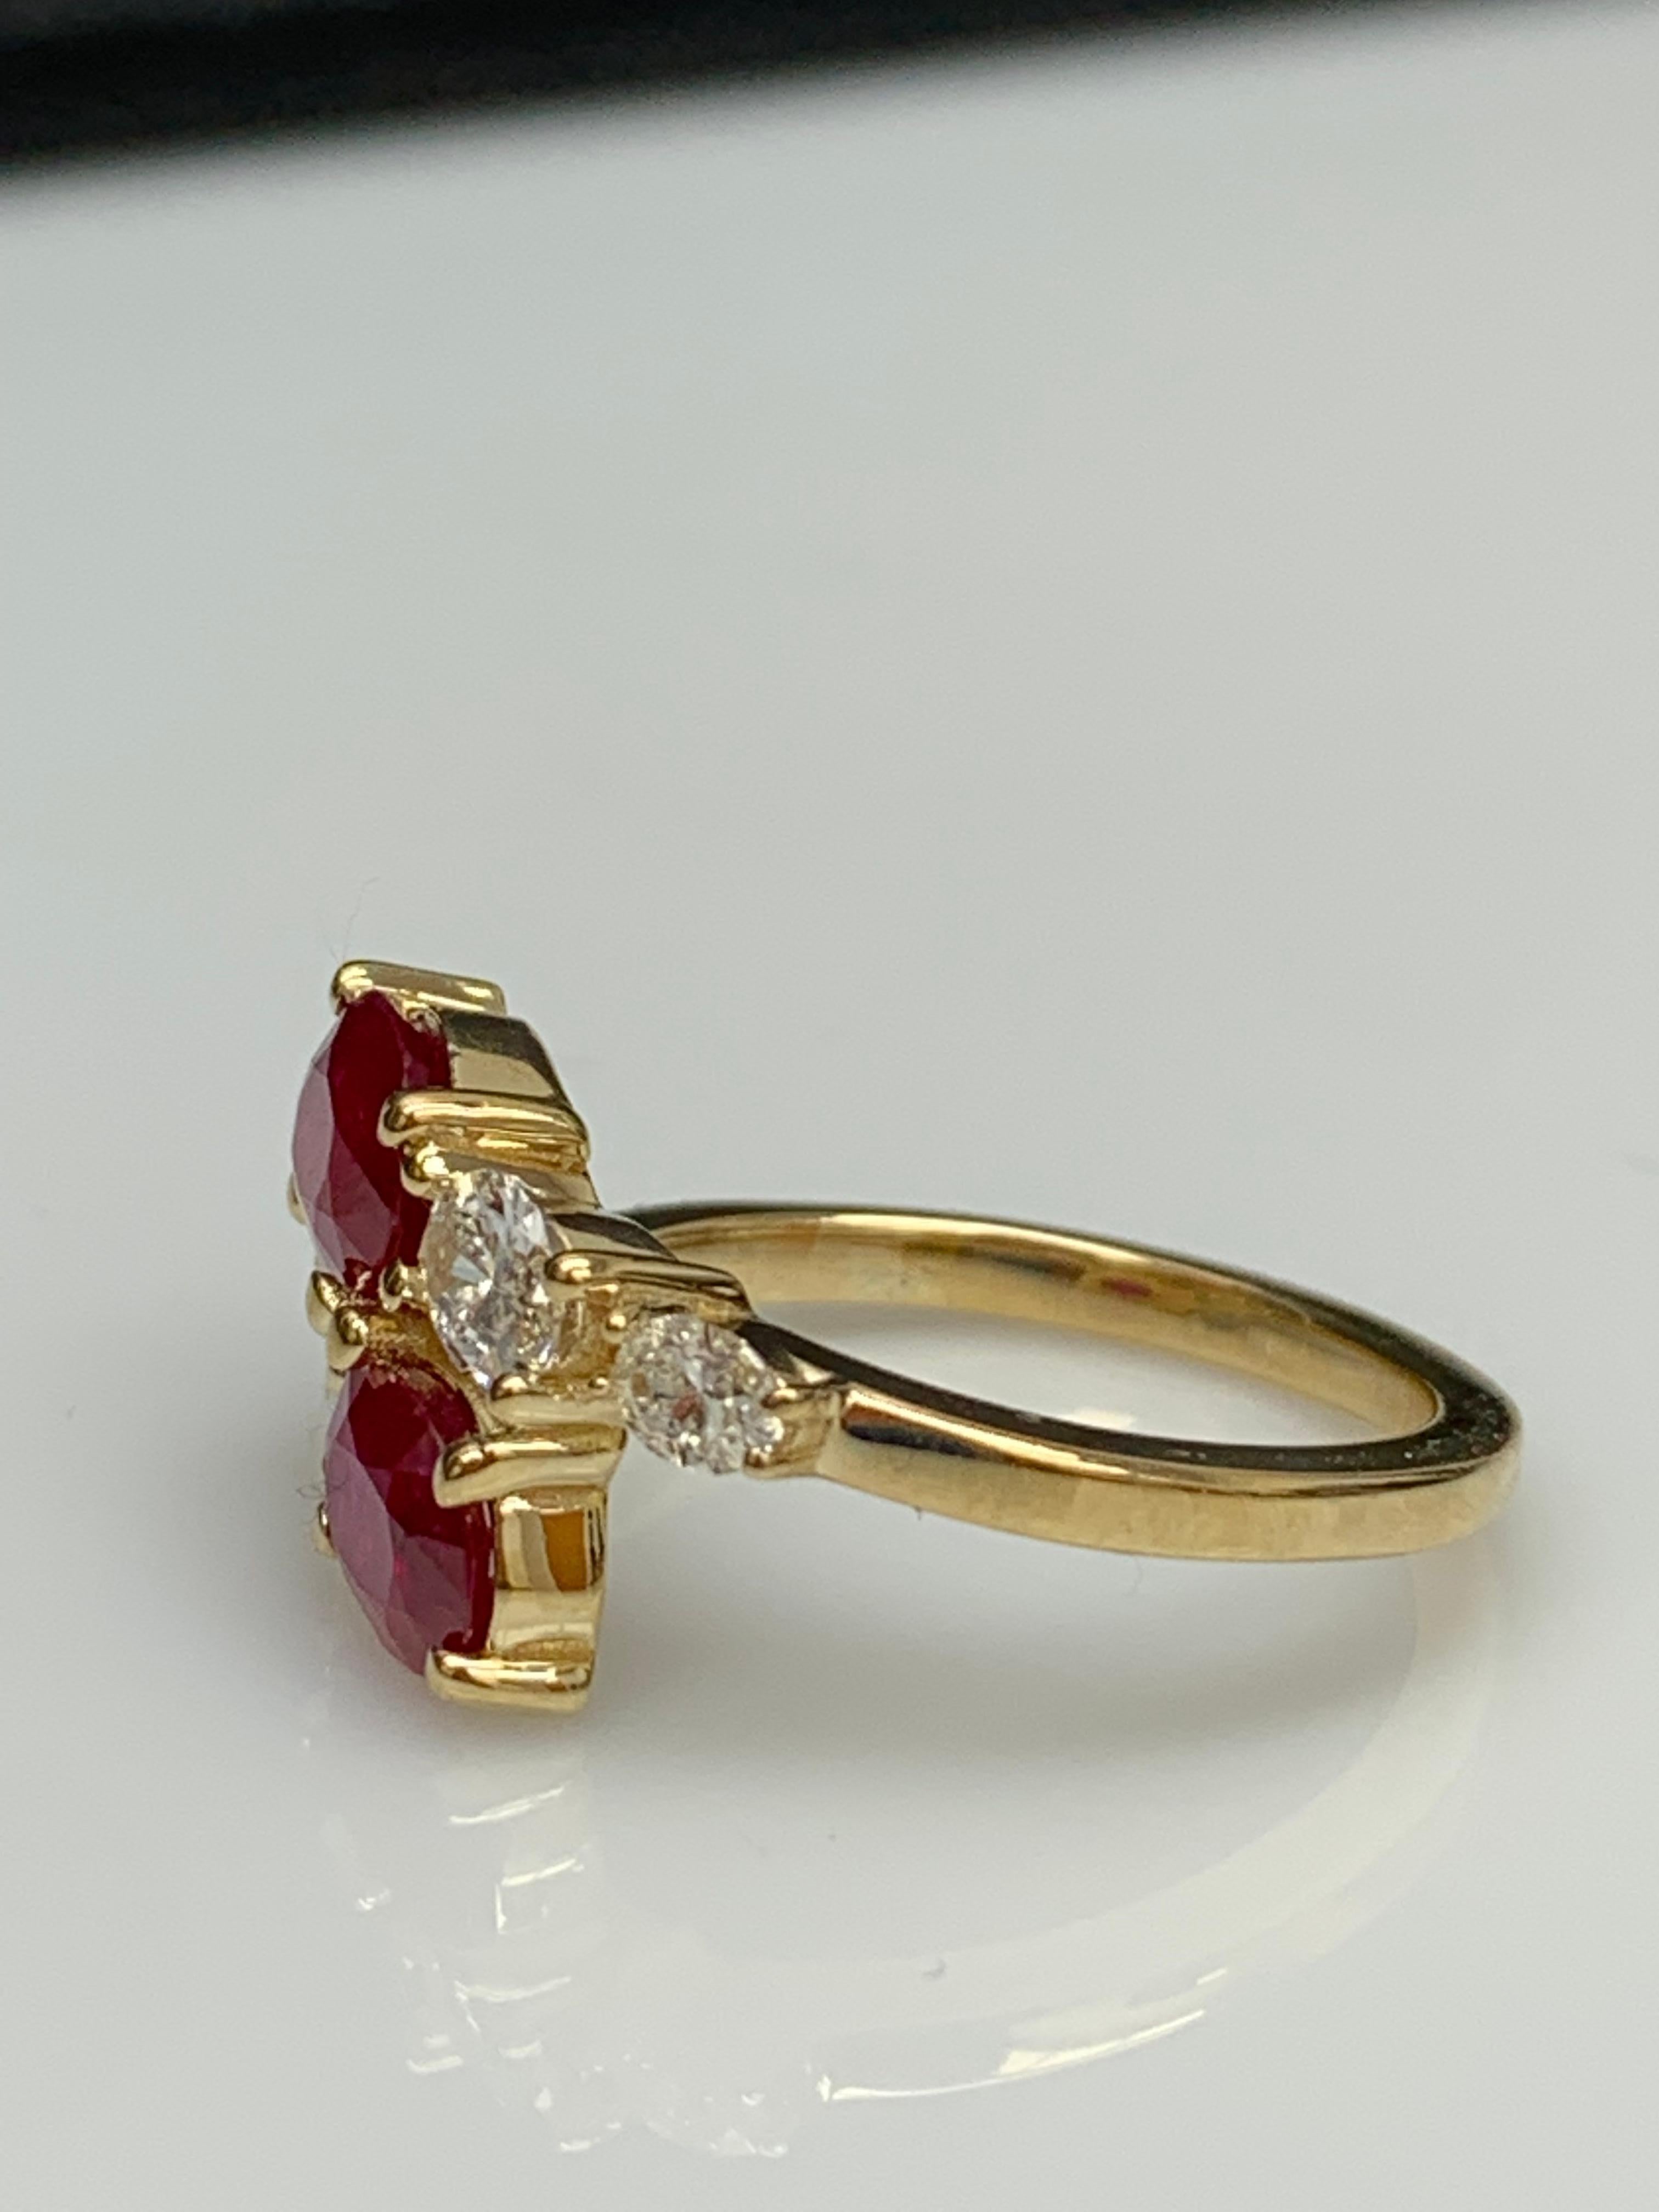 2.18 Carat Oval Cut Ruby Diamond Toi et Moi Engagement Ring in 14K Yellow Gold For Sale 7